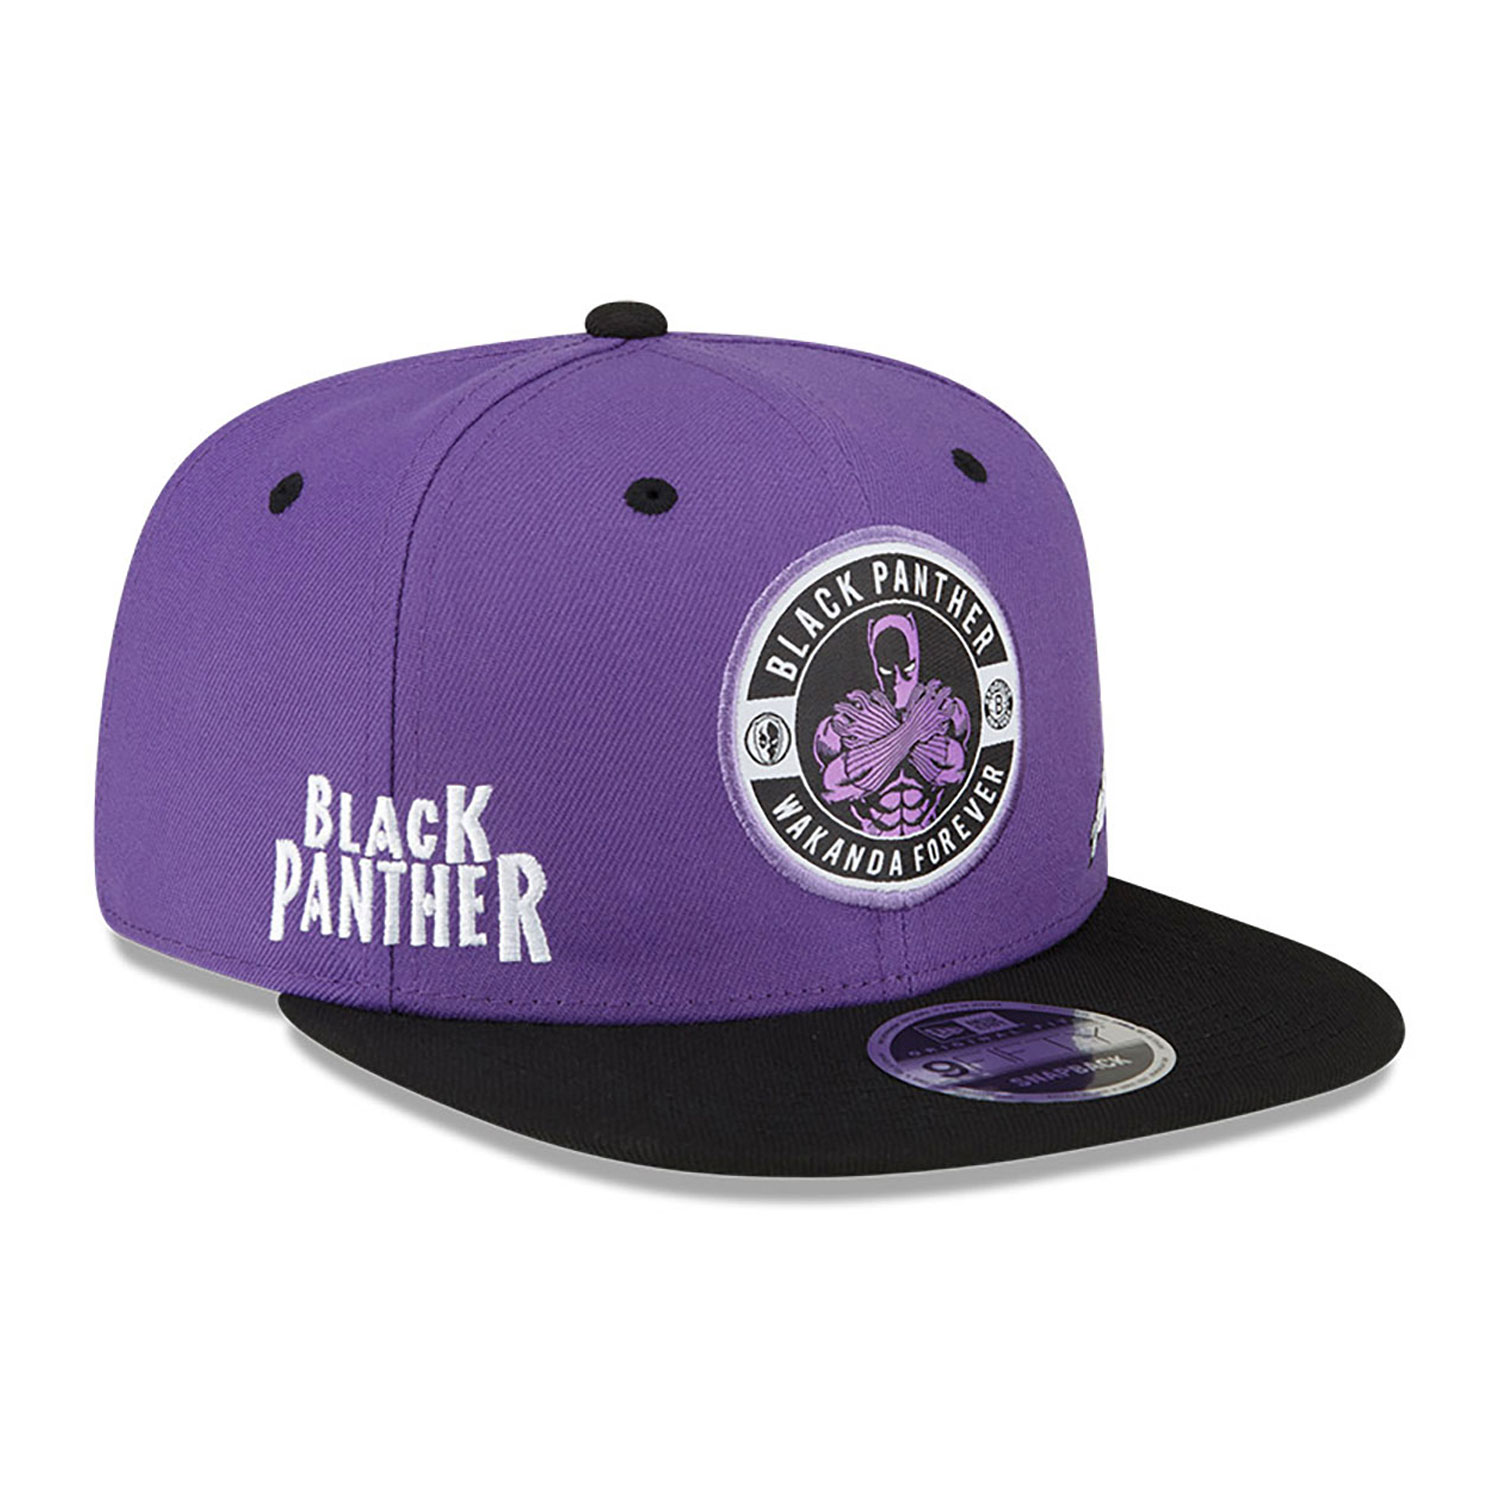 Casquette 9FIFTY Snapback Brooklyn Nets NBA Marvel Black Panther violette